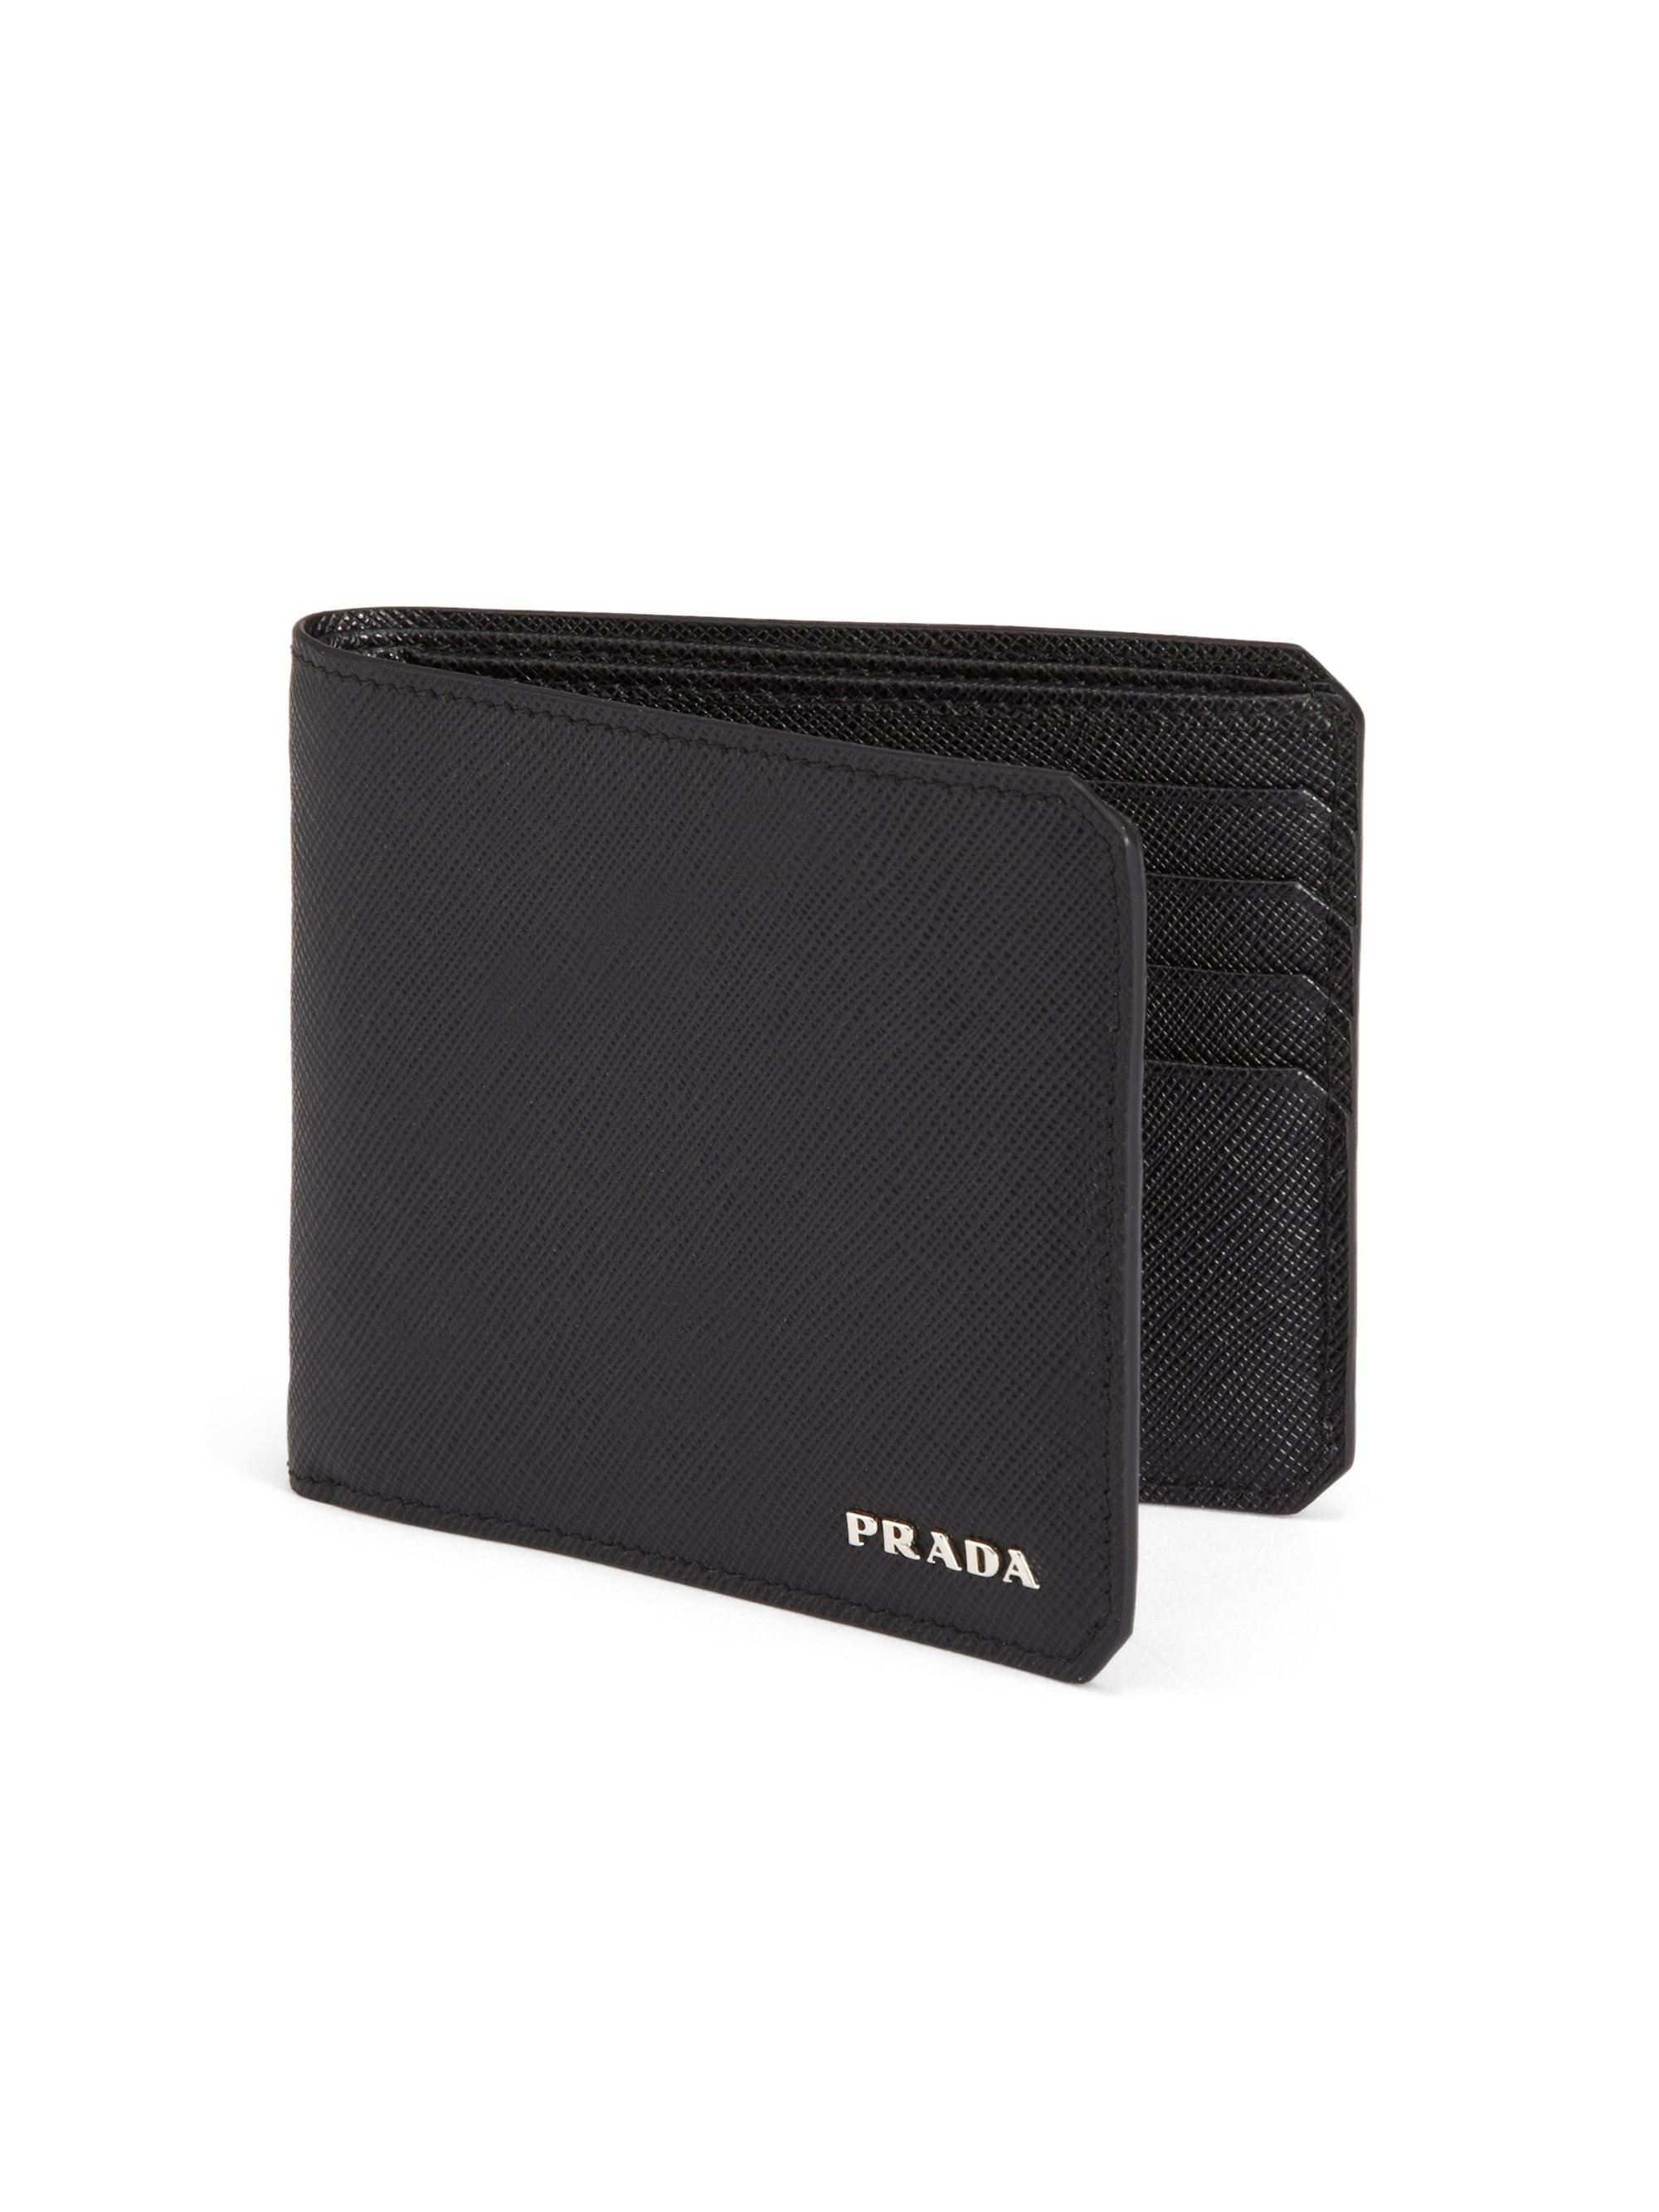 Prada Saffiano Leather Bifold Wallet in Gray for Men | Lyst